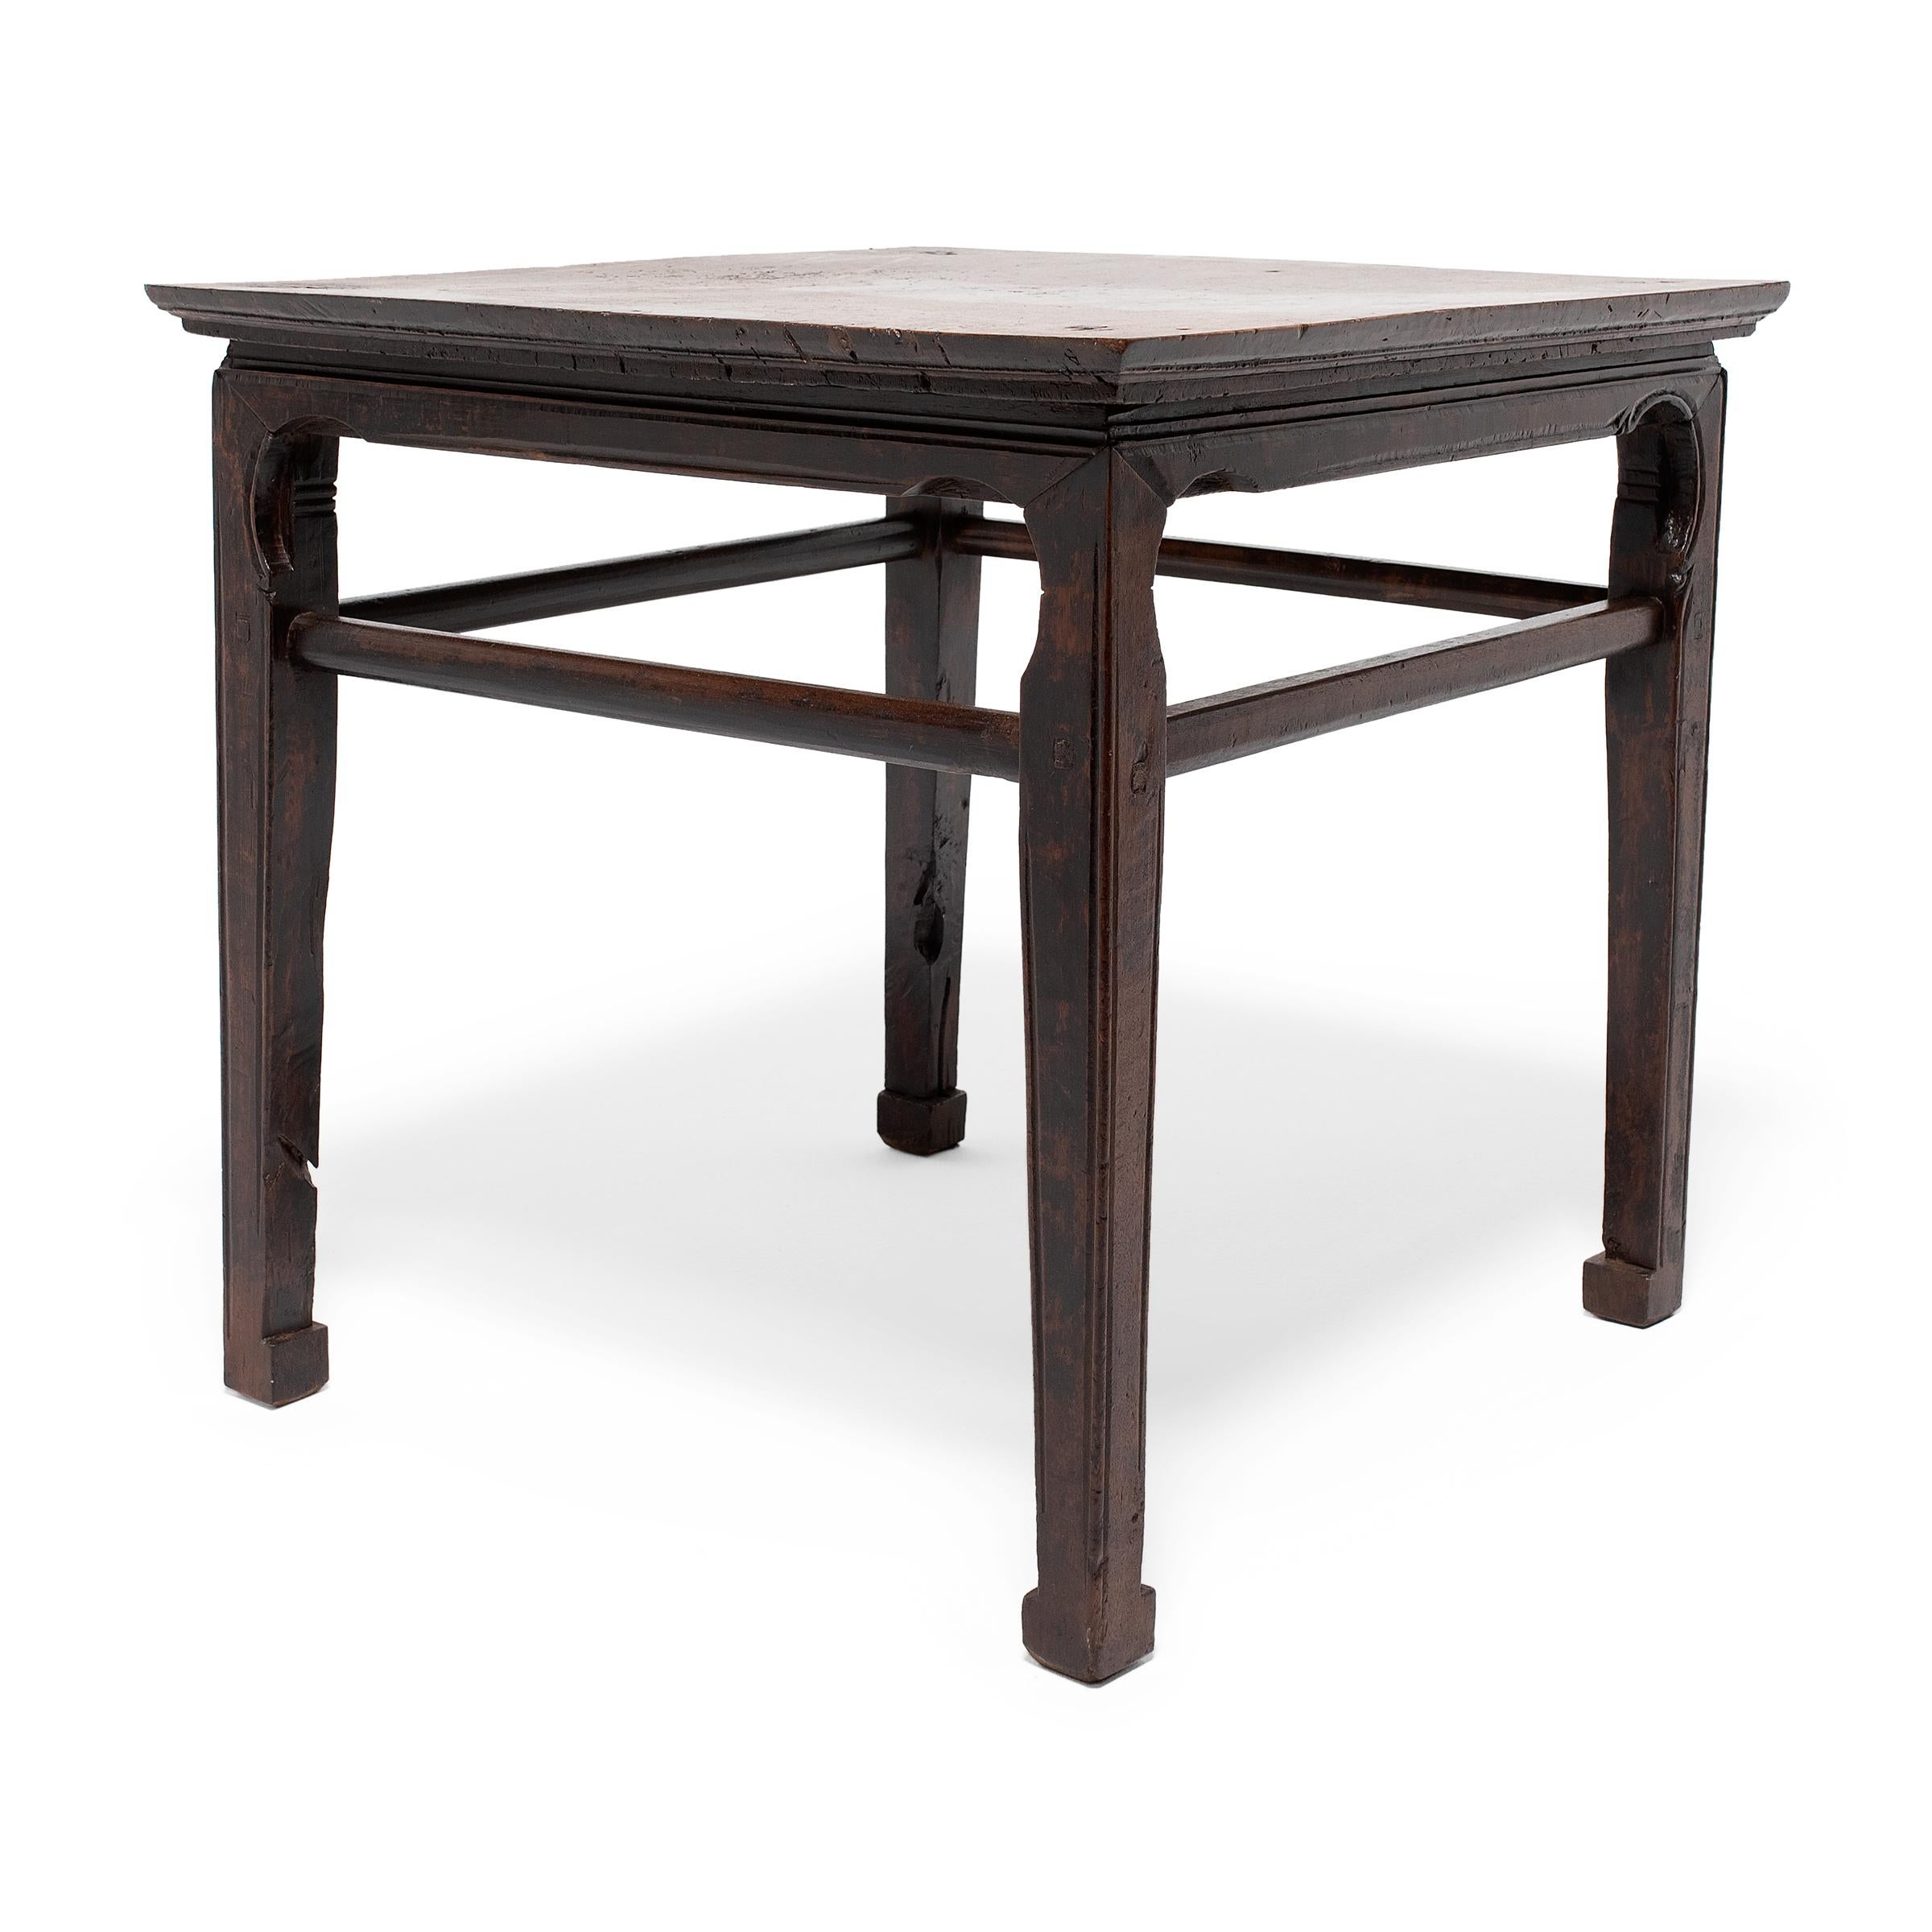 Chinese Square Burlwood Table, c. 1850 In Good Condition For Sale In Chicago, IL